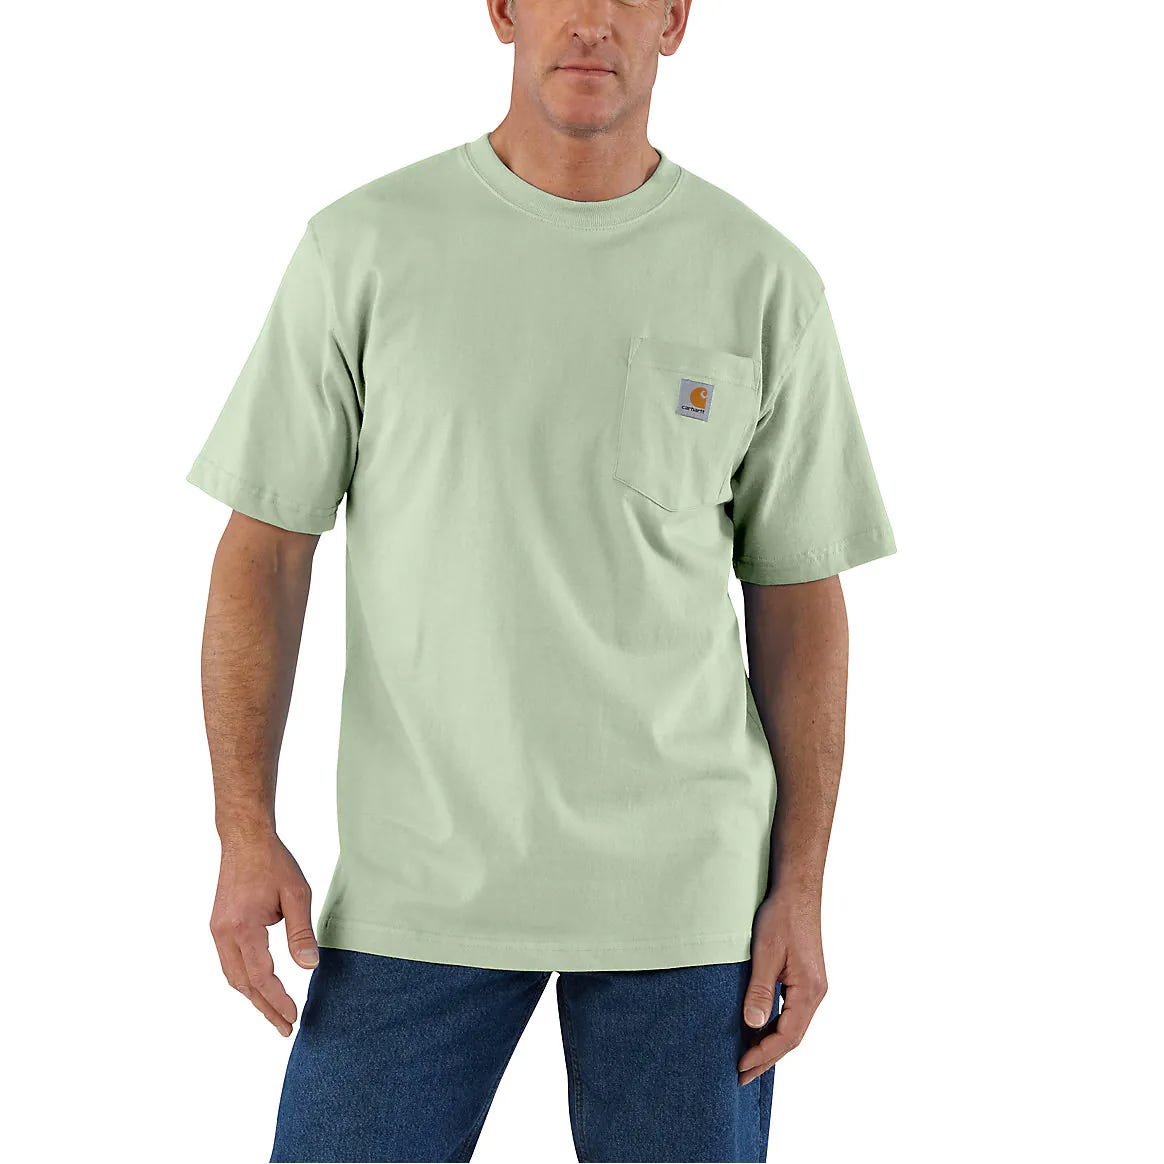 A man wearing a light green, pocketed T-shirt and blue jeans.